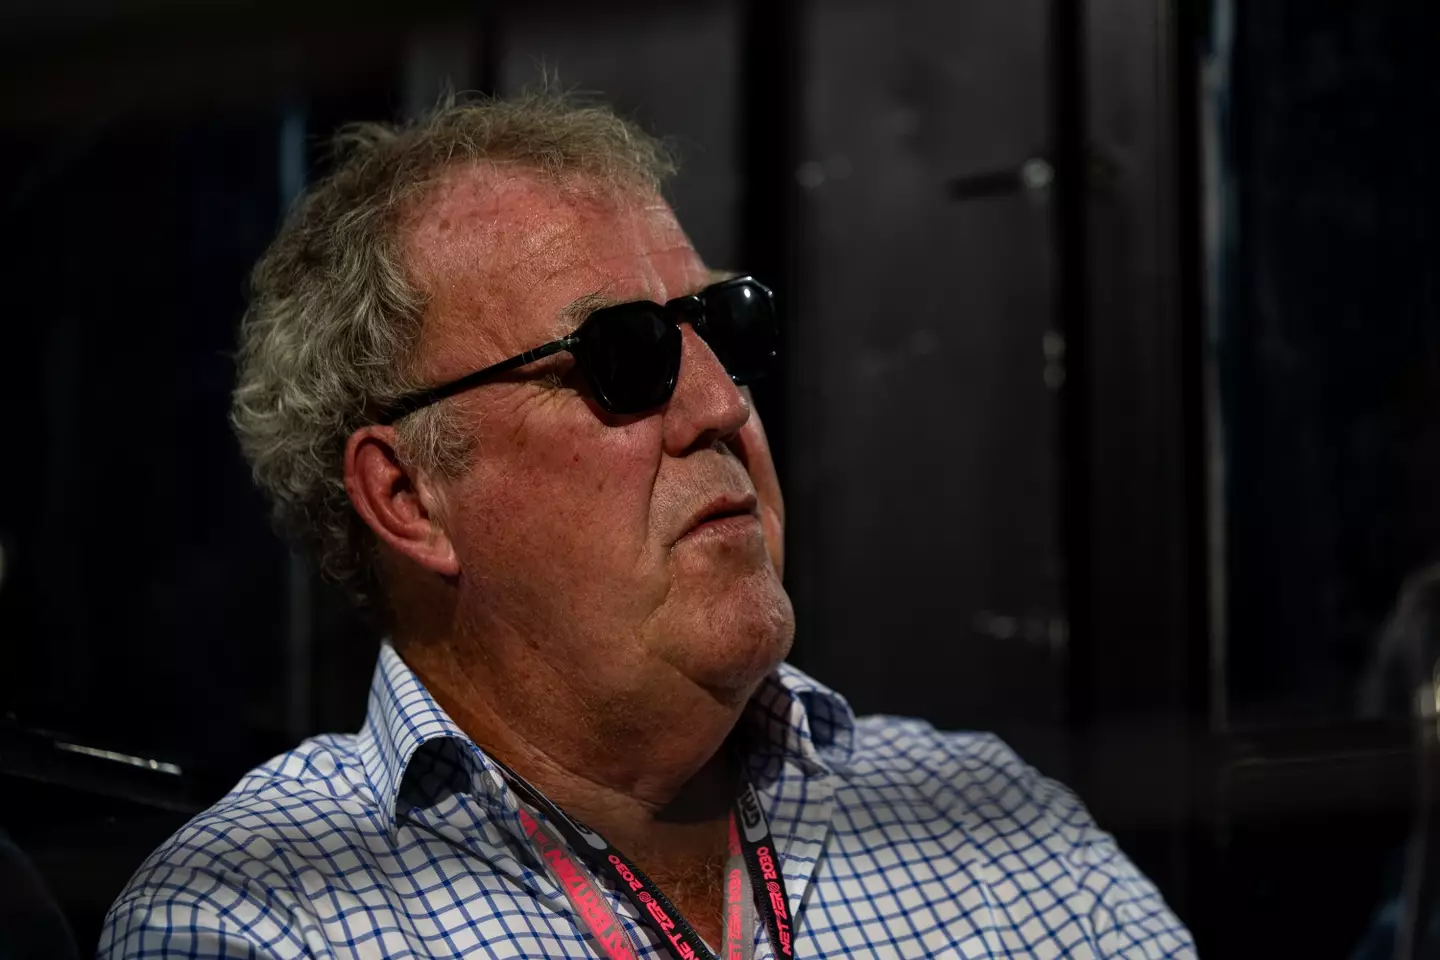 Clarkson has been advised to use listening devices.